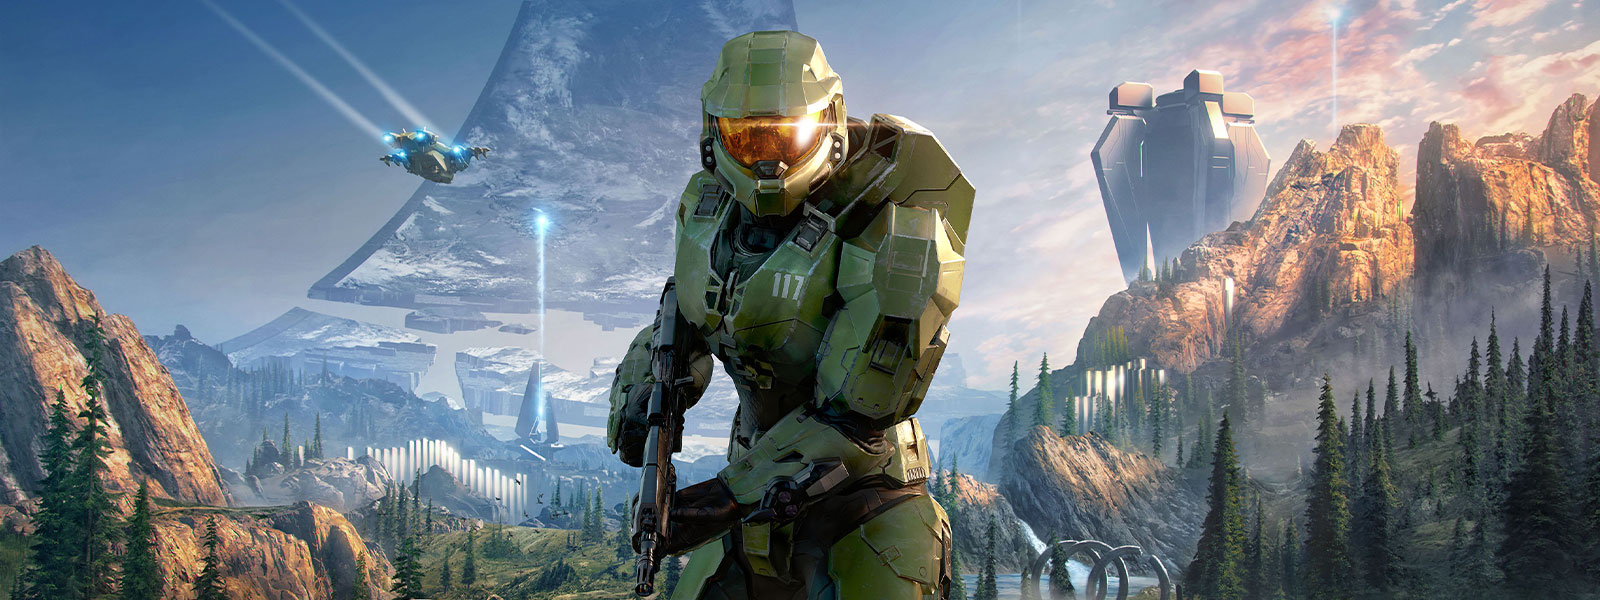 Master Chief holding an assault rifle with the ring in the background